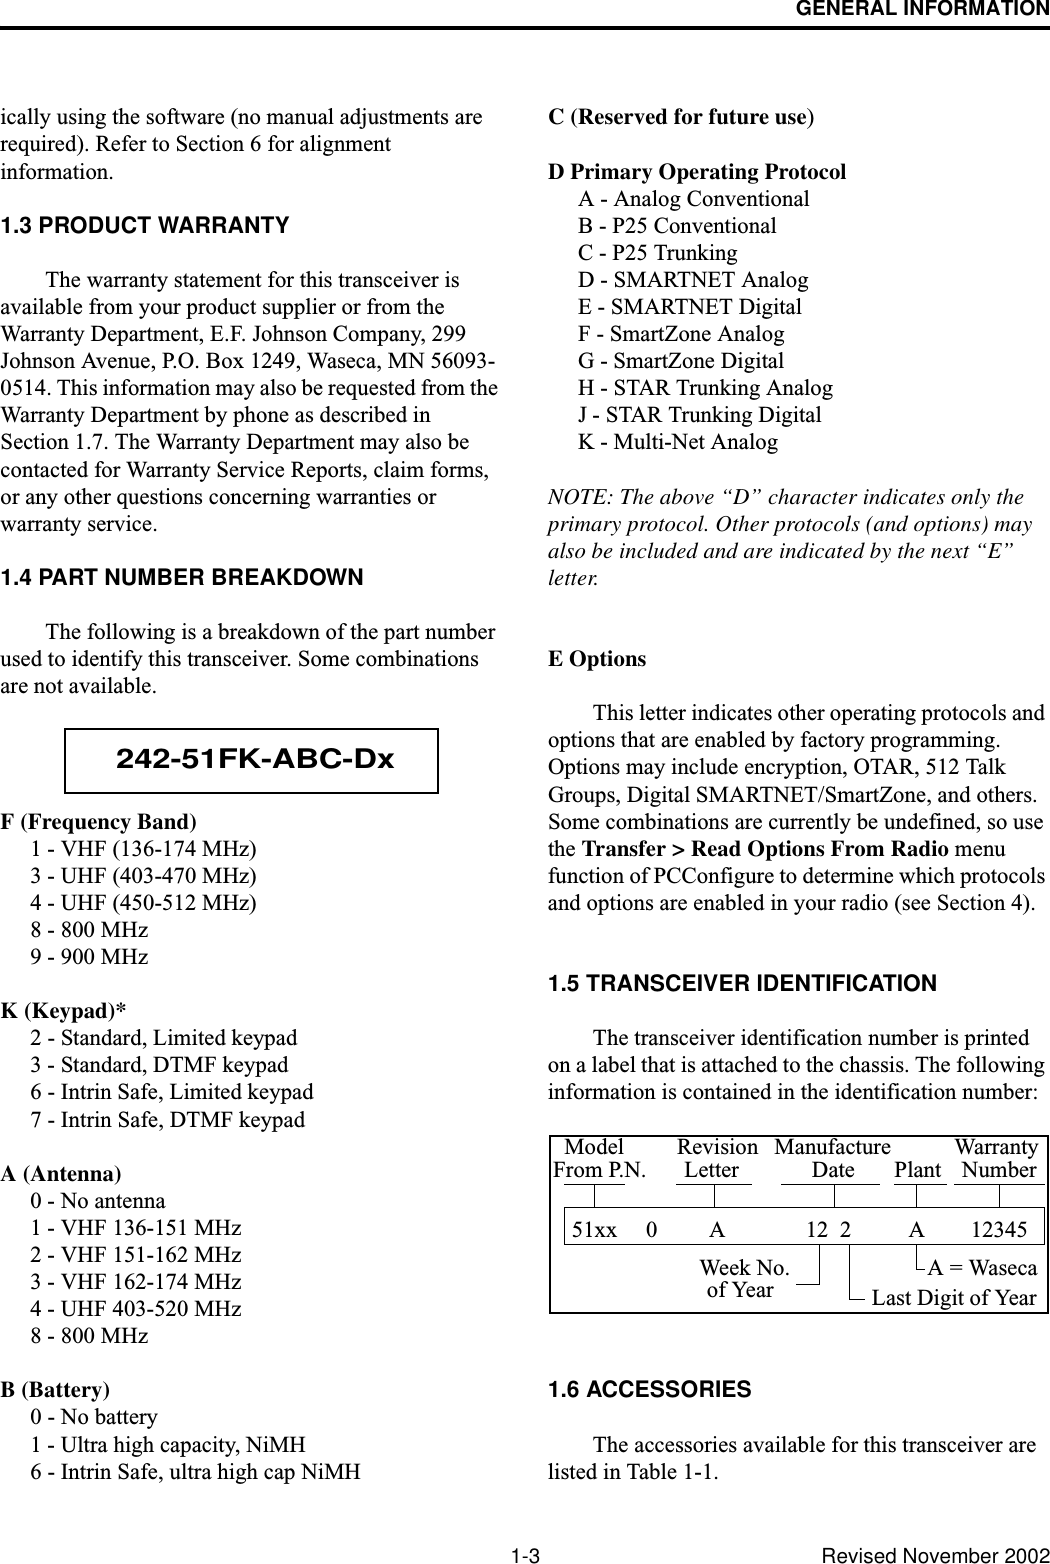 GENERAL INFORMATION1-3 Revised November 2002ically using the software (no manual adjustments are required). Refer to Section 6 for alignment information.1.3 PRODUCT WARRANTYThe warranty statement for this transceiver is available from your product supplier or from the Warranty Department, E.F. Johnson Company, 299 Johnson Avenue, P.O. Box 1249, Waseca, MN 56093-0514. This information may also be requested from the Warranty Department by phone as described in Section 1.7. The Warranty Department may also be contacted for Warranty Service Reports, claim forms, or any other questions concerning warranties or warranty service.1.4 PART NUMBER BREAKDOWNThe following is a breakdown of the part number used to identify this transceiver. Some combinations are not available.F (Frequency Band)1 - VHF (136-174 MHz)3 - UHF (403-470 MHz)4 - UHF (450-512 MHz)8 - 800 MHz9 - 900 MHzK (Keypad)*2 - Standard, Limited keypad3 - Standard, DTMF keypad6 - Intrin Safe, Limited keypad7 - Intrin Safe, DTMF keypadA (Antenna)0 - No antenna1 - VHF 136-151 MHz2 - VHF 151-162 MHz3 - VHF 162-174 MHz4 - UHF 403-520 MHz8 - 800 MHzB (Battery)0 - No battery1 - Ultra high capacity, NiMH6 - Intrin Safe, ultra high cap NiMHC (Reserved for future use)D Primary Operating ProtocolA - Analog ConventionalB - P25 ConventionalC - P25 TrunkingD - SMARTNET AnalogE - SMARTNET DigitalF - SmartZone AnalogG - SmartZone DigitalH - STAR Trunking AnalogJ - STAR Trunking DigitalK - Multi-Net AnalogNOTE: The above “D” character indicates only the primary protocol. Other protocols (and options) may also be included and are indicated by the next “E” letter.E OptionsThis letter indicates other operating protocols and options that are enabled by factory programming. Options may include encryption, OTAR, 512 Talk Groups, Digital SMARTNET/SmartZone, and others. Some combinations are currently be undefined, so use the Transfer &gt; Read Options From Radio menu function of PCConfigure to determine which protocols and options are enabled in your radio (see Section 4).1.5 TRANSCEIVER IDENTIFICATIONThe transceiver identification number is printed on a label that is attached to the chassis. The following information is contained in the identification number:1.6 ACCESSORIESThe accessories available for this transceiver are listed in Table 1-1. 242-51FK-ABC-Dx51xx     0         A              12  2          A        12345Model RevisionLetterManufactureDateWarrantyNumberWeek No.of Year Last Digit of YearA = Waseca PlantFrom P.N.